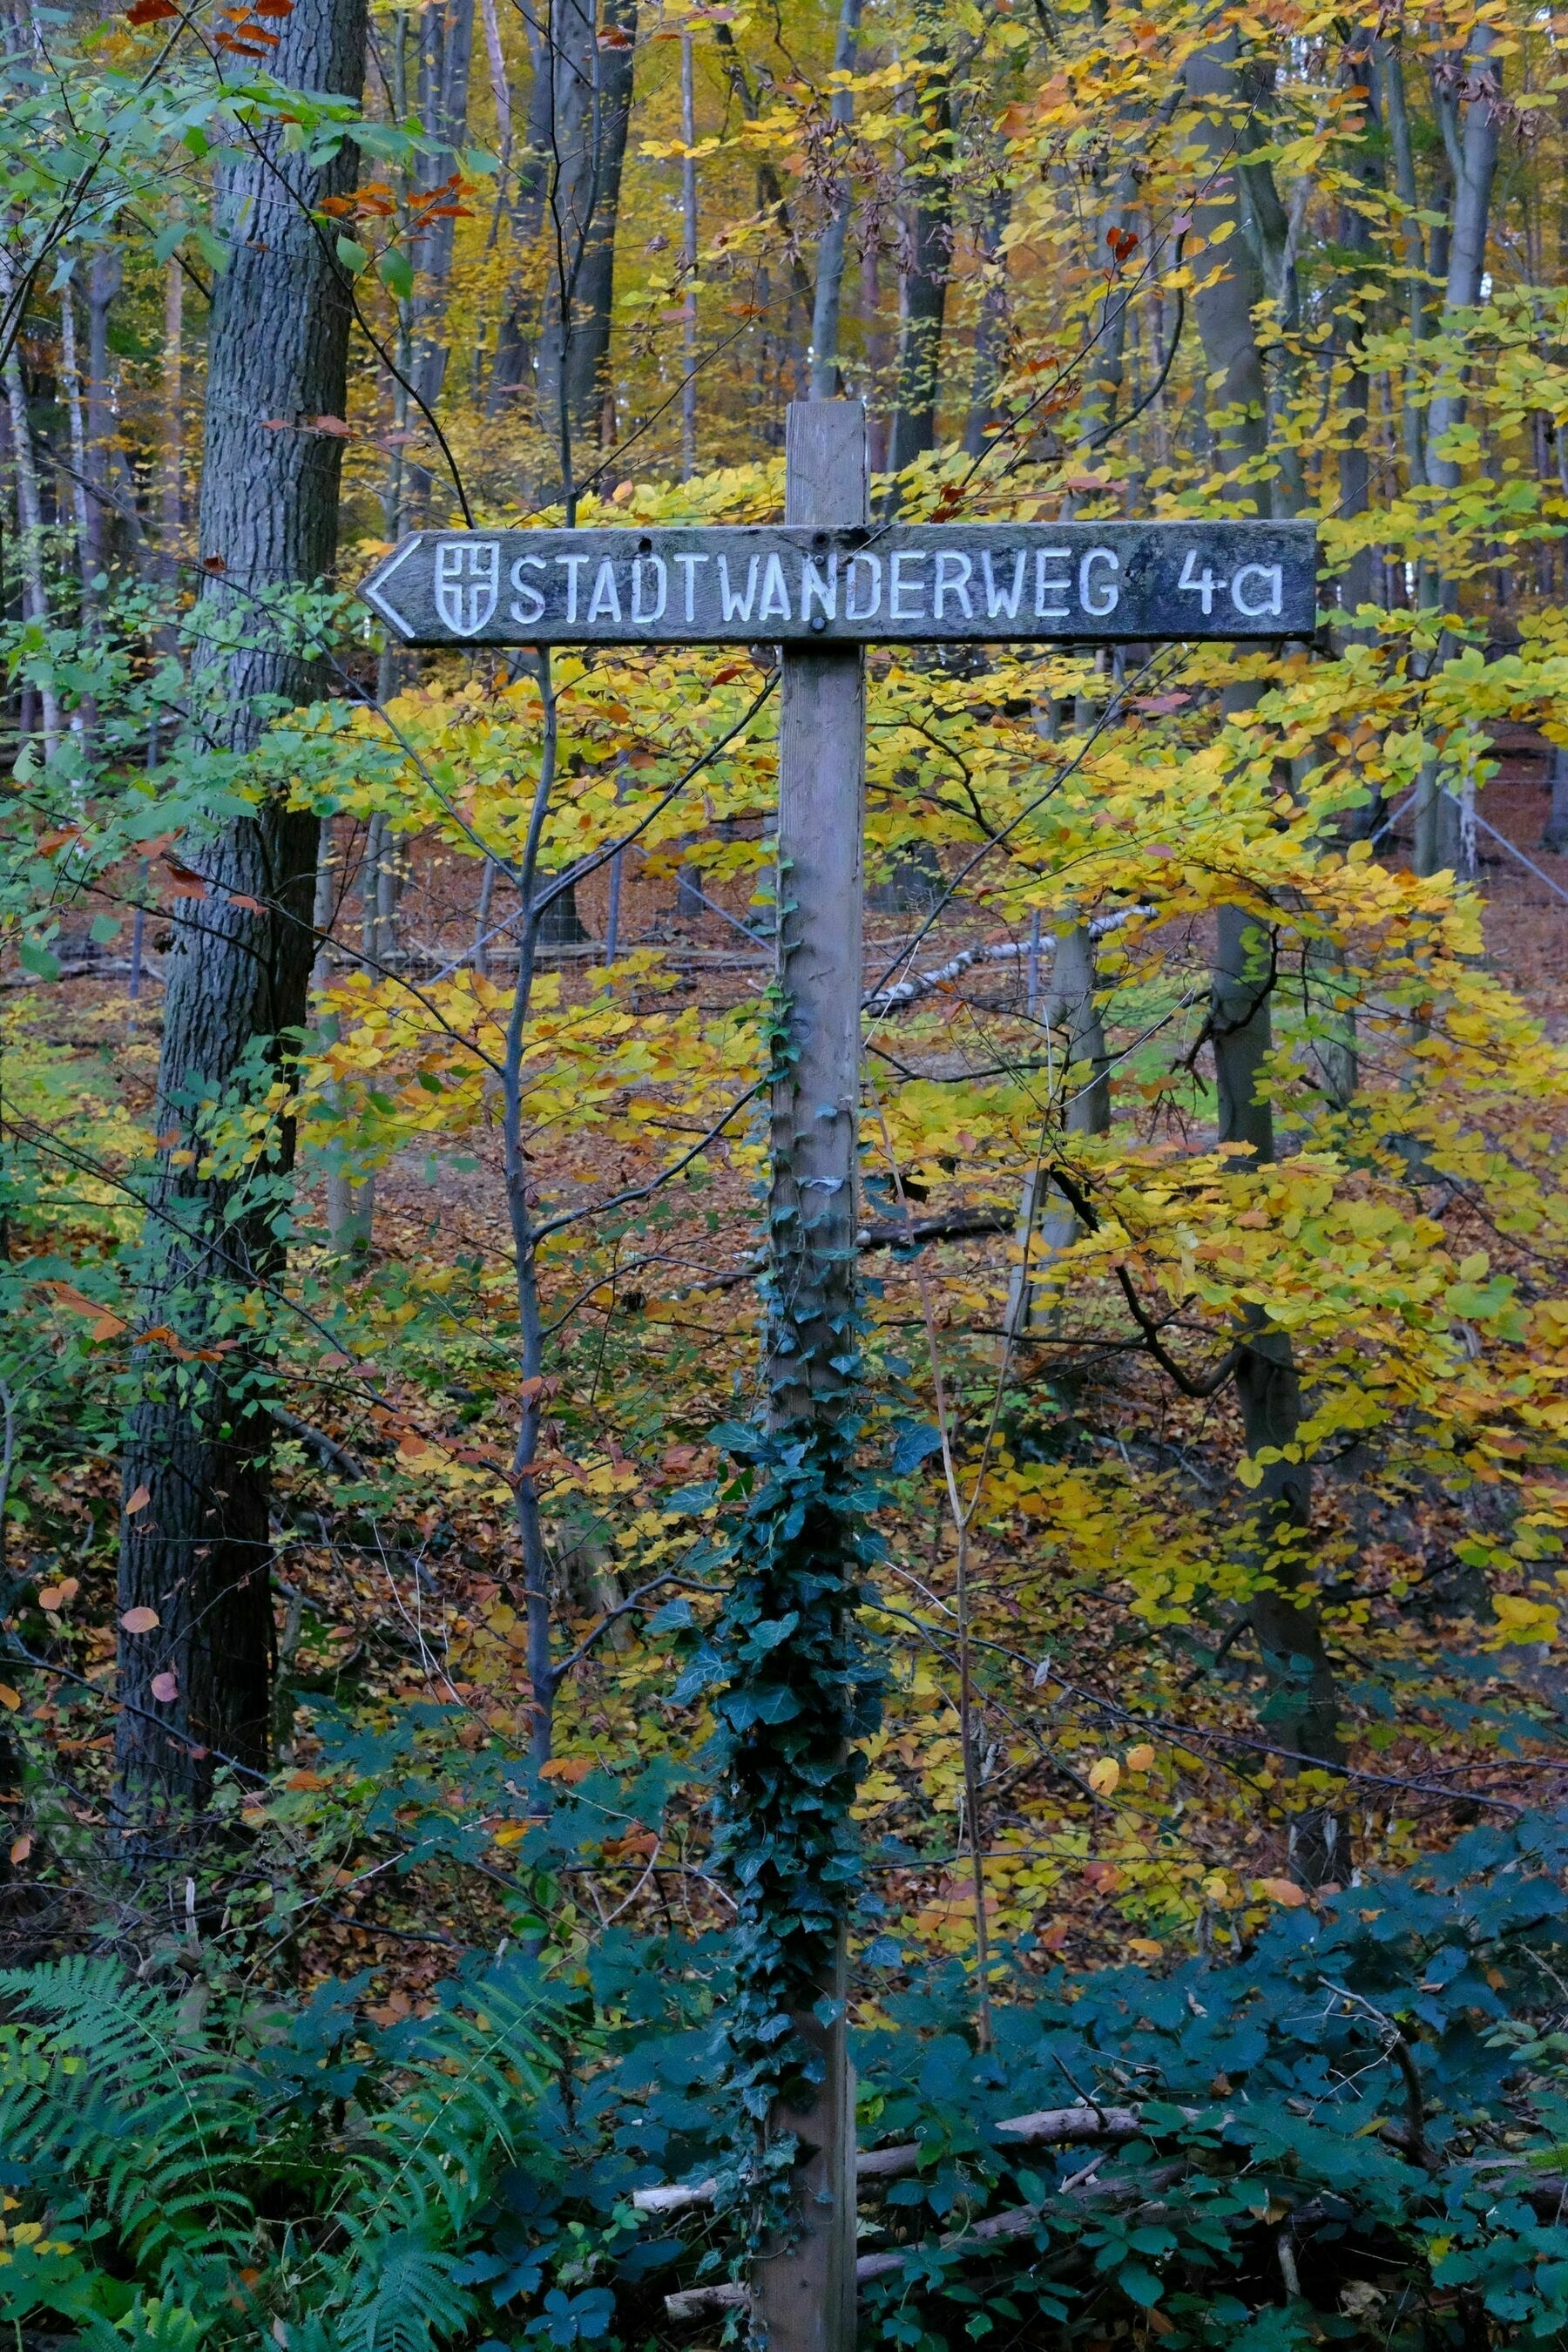 Wooden sign saying “Stadtwanderweg 4a”, behind is a forest with leaves turning green yellow